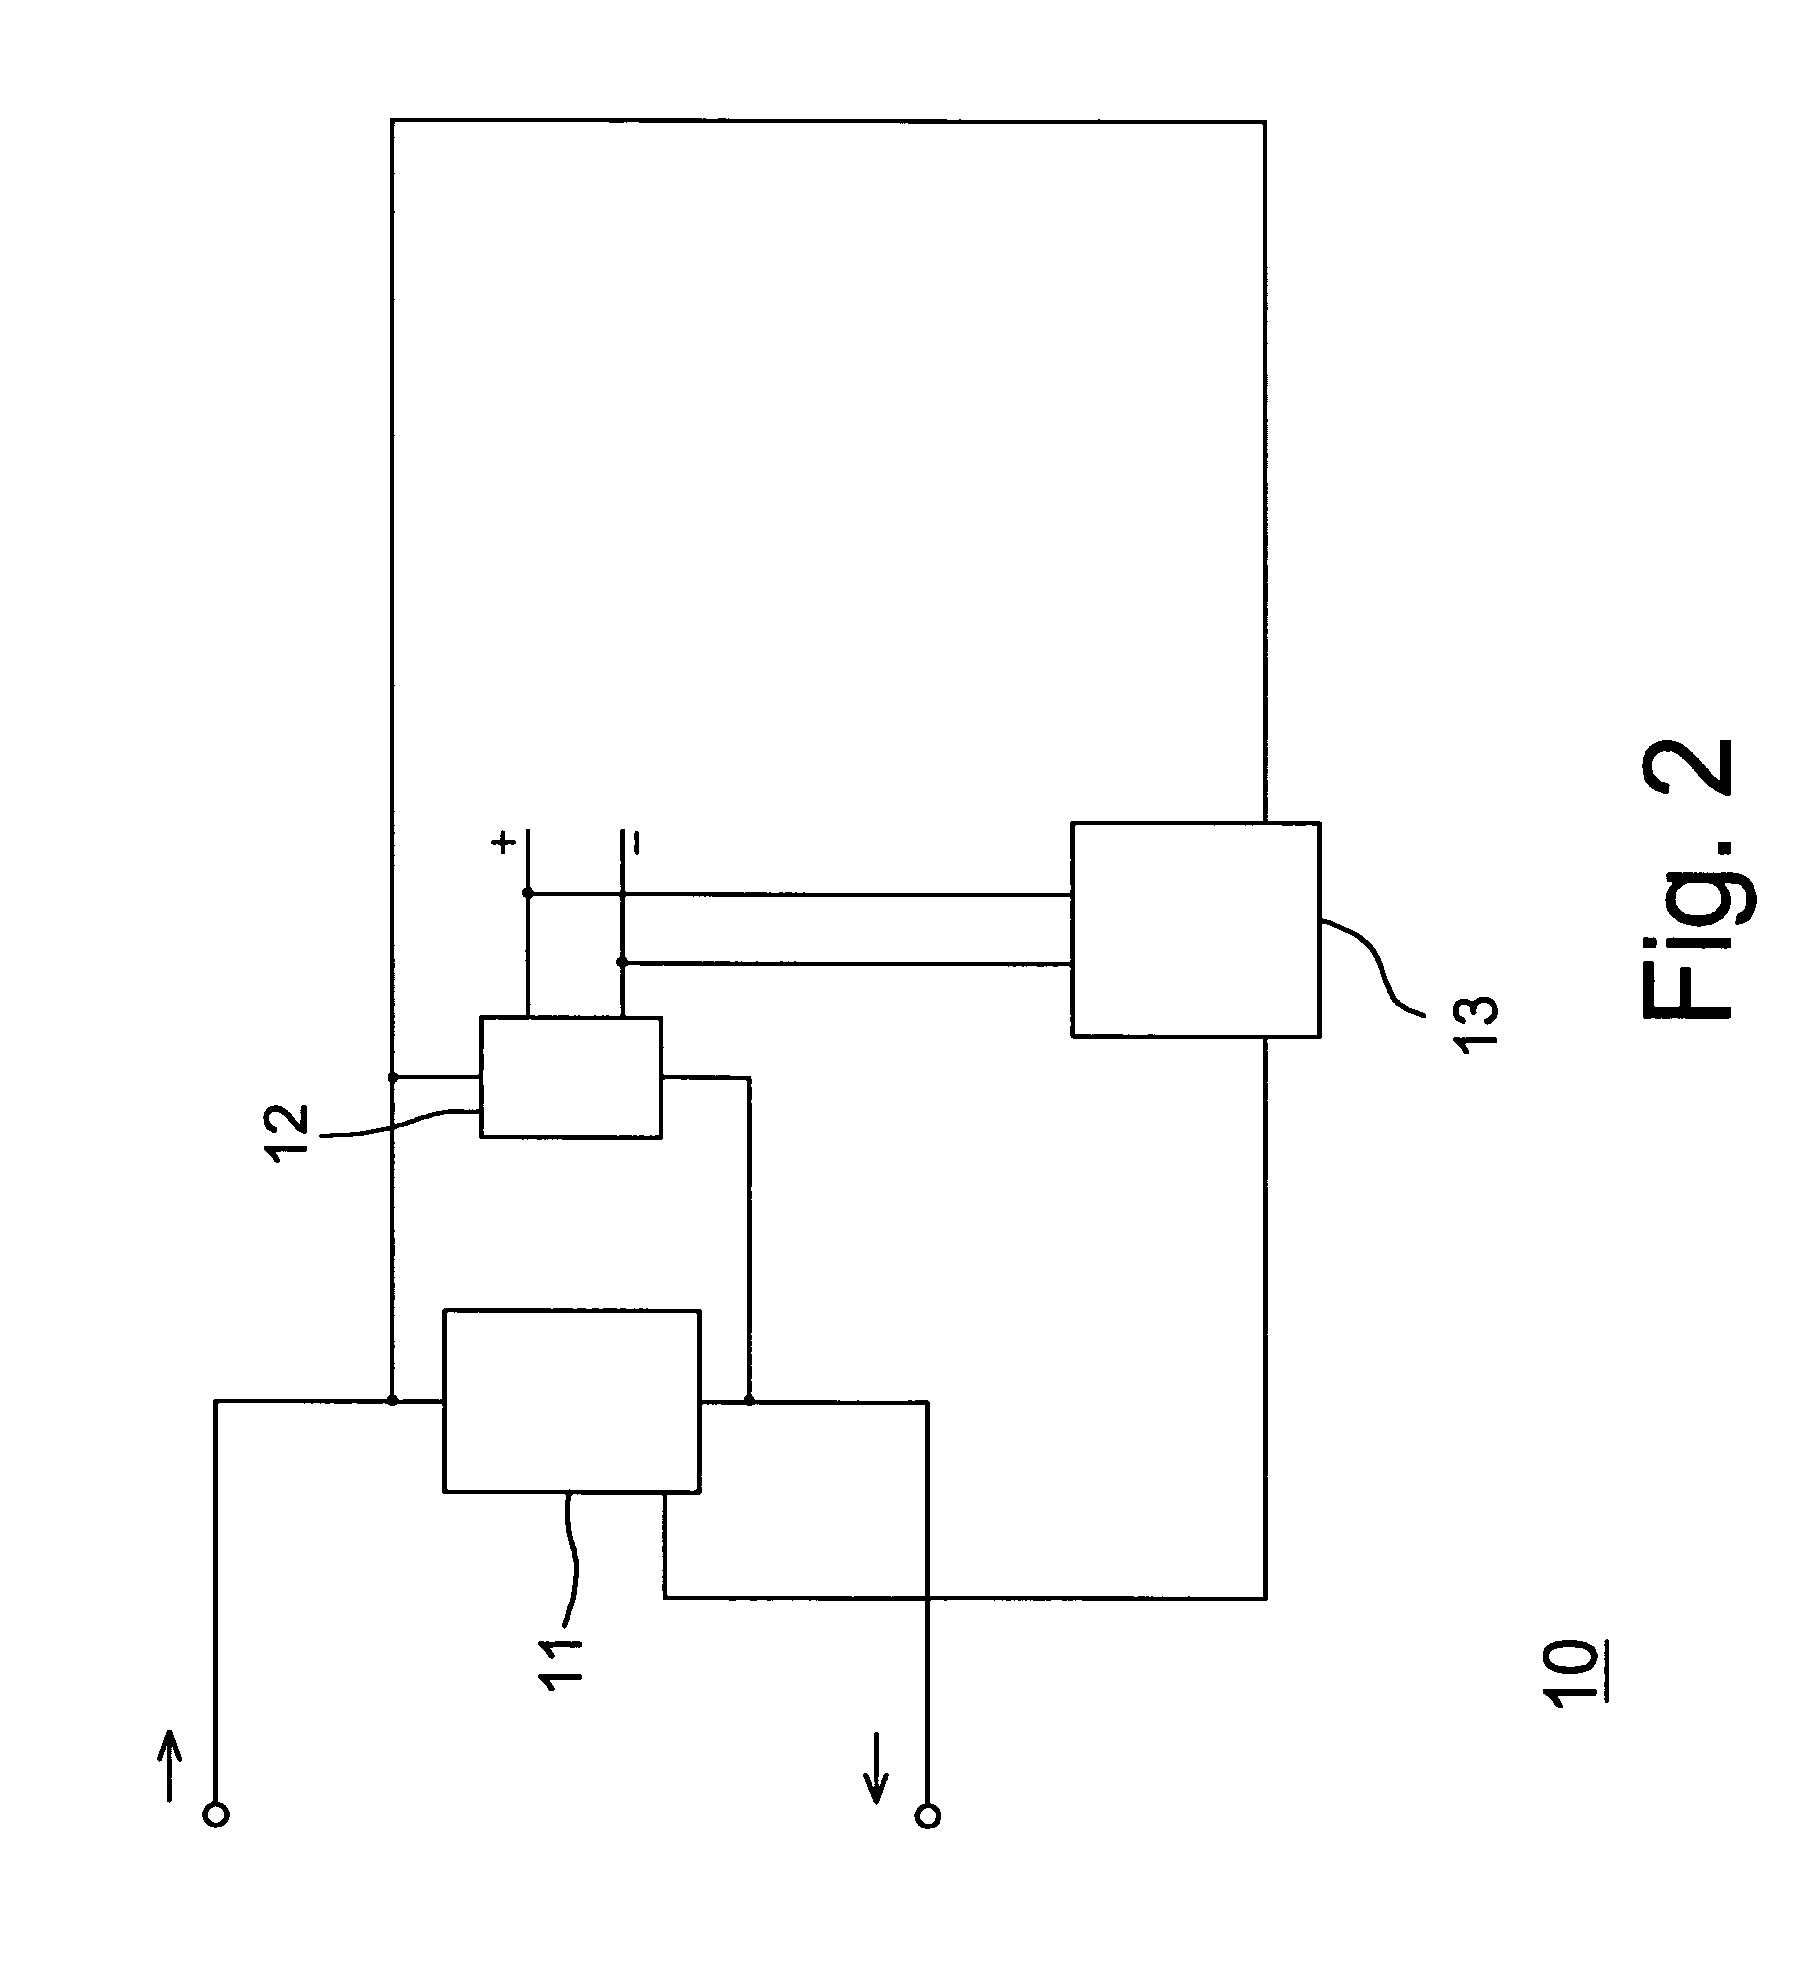 Picking and supplying circuit for discharging direct current